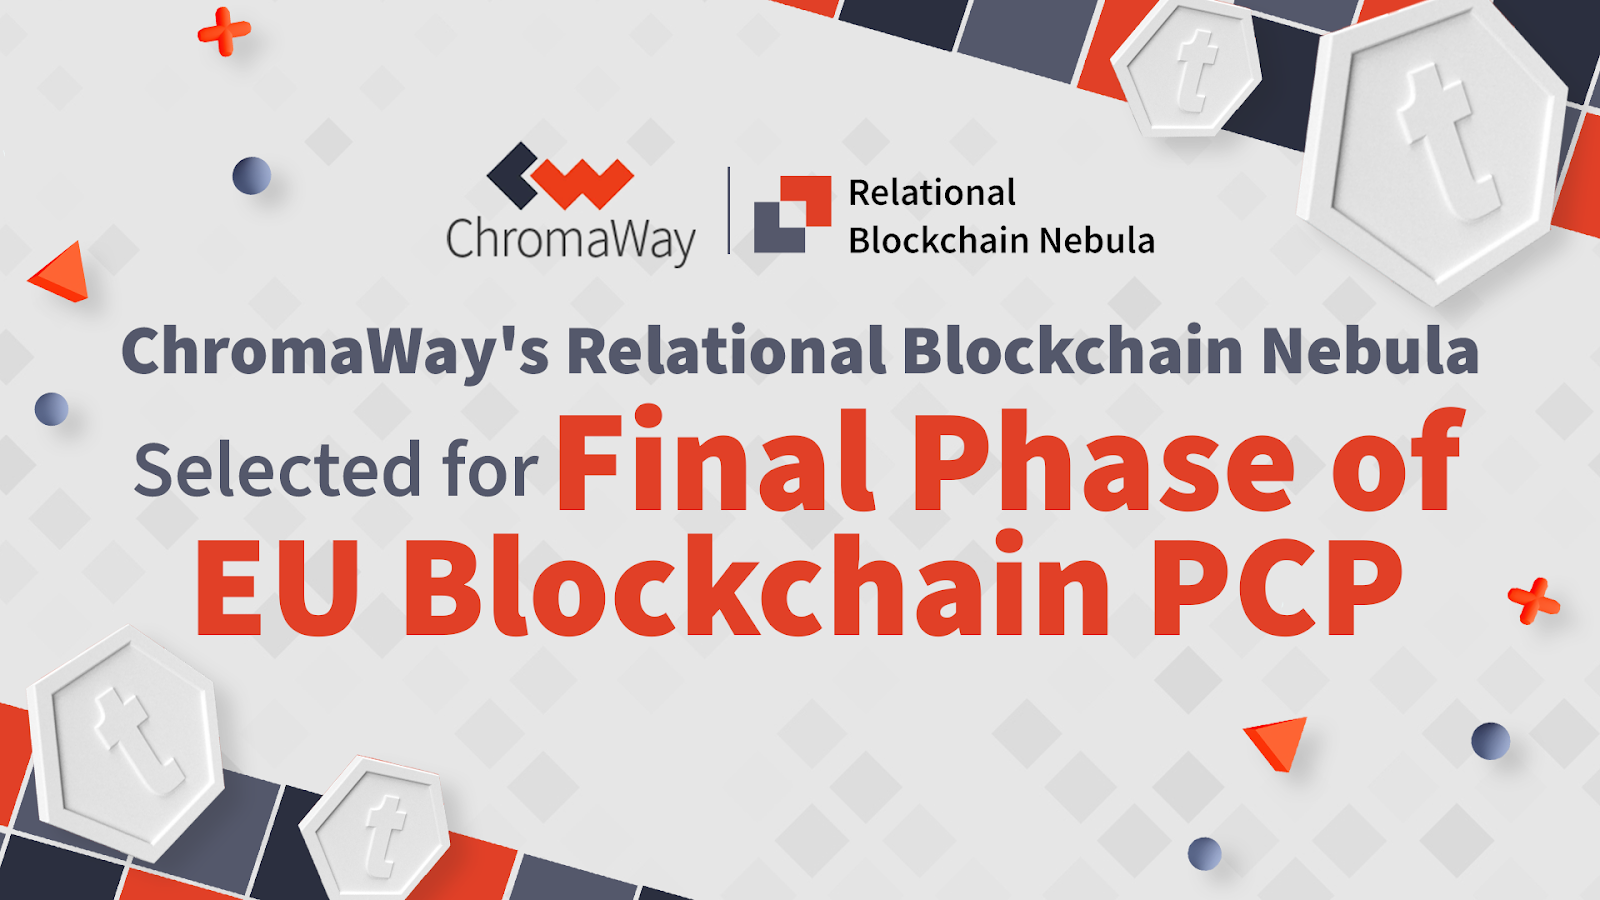 The relational blockchain cloud chosen for the final phase of the EU Blockchain PCP